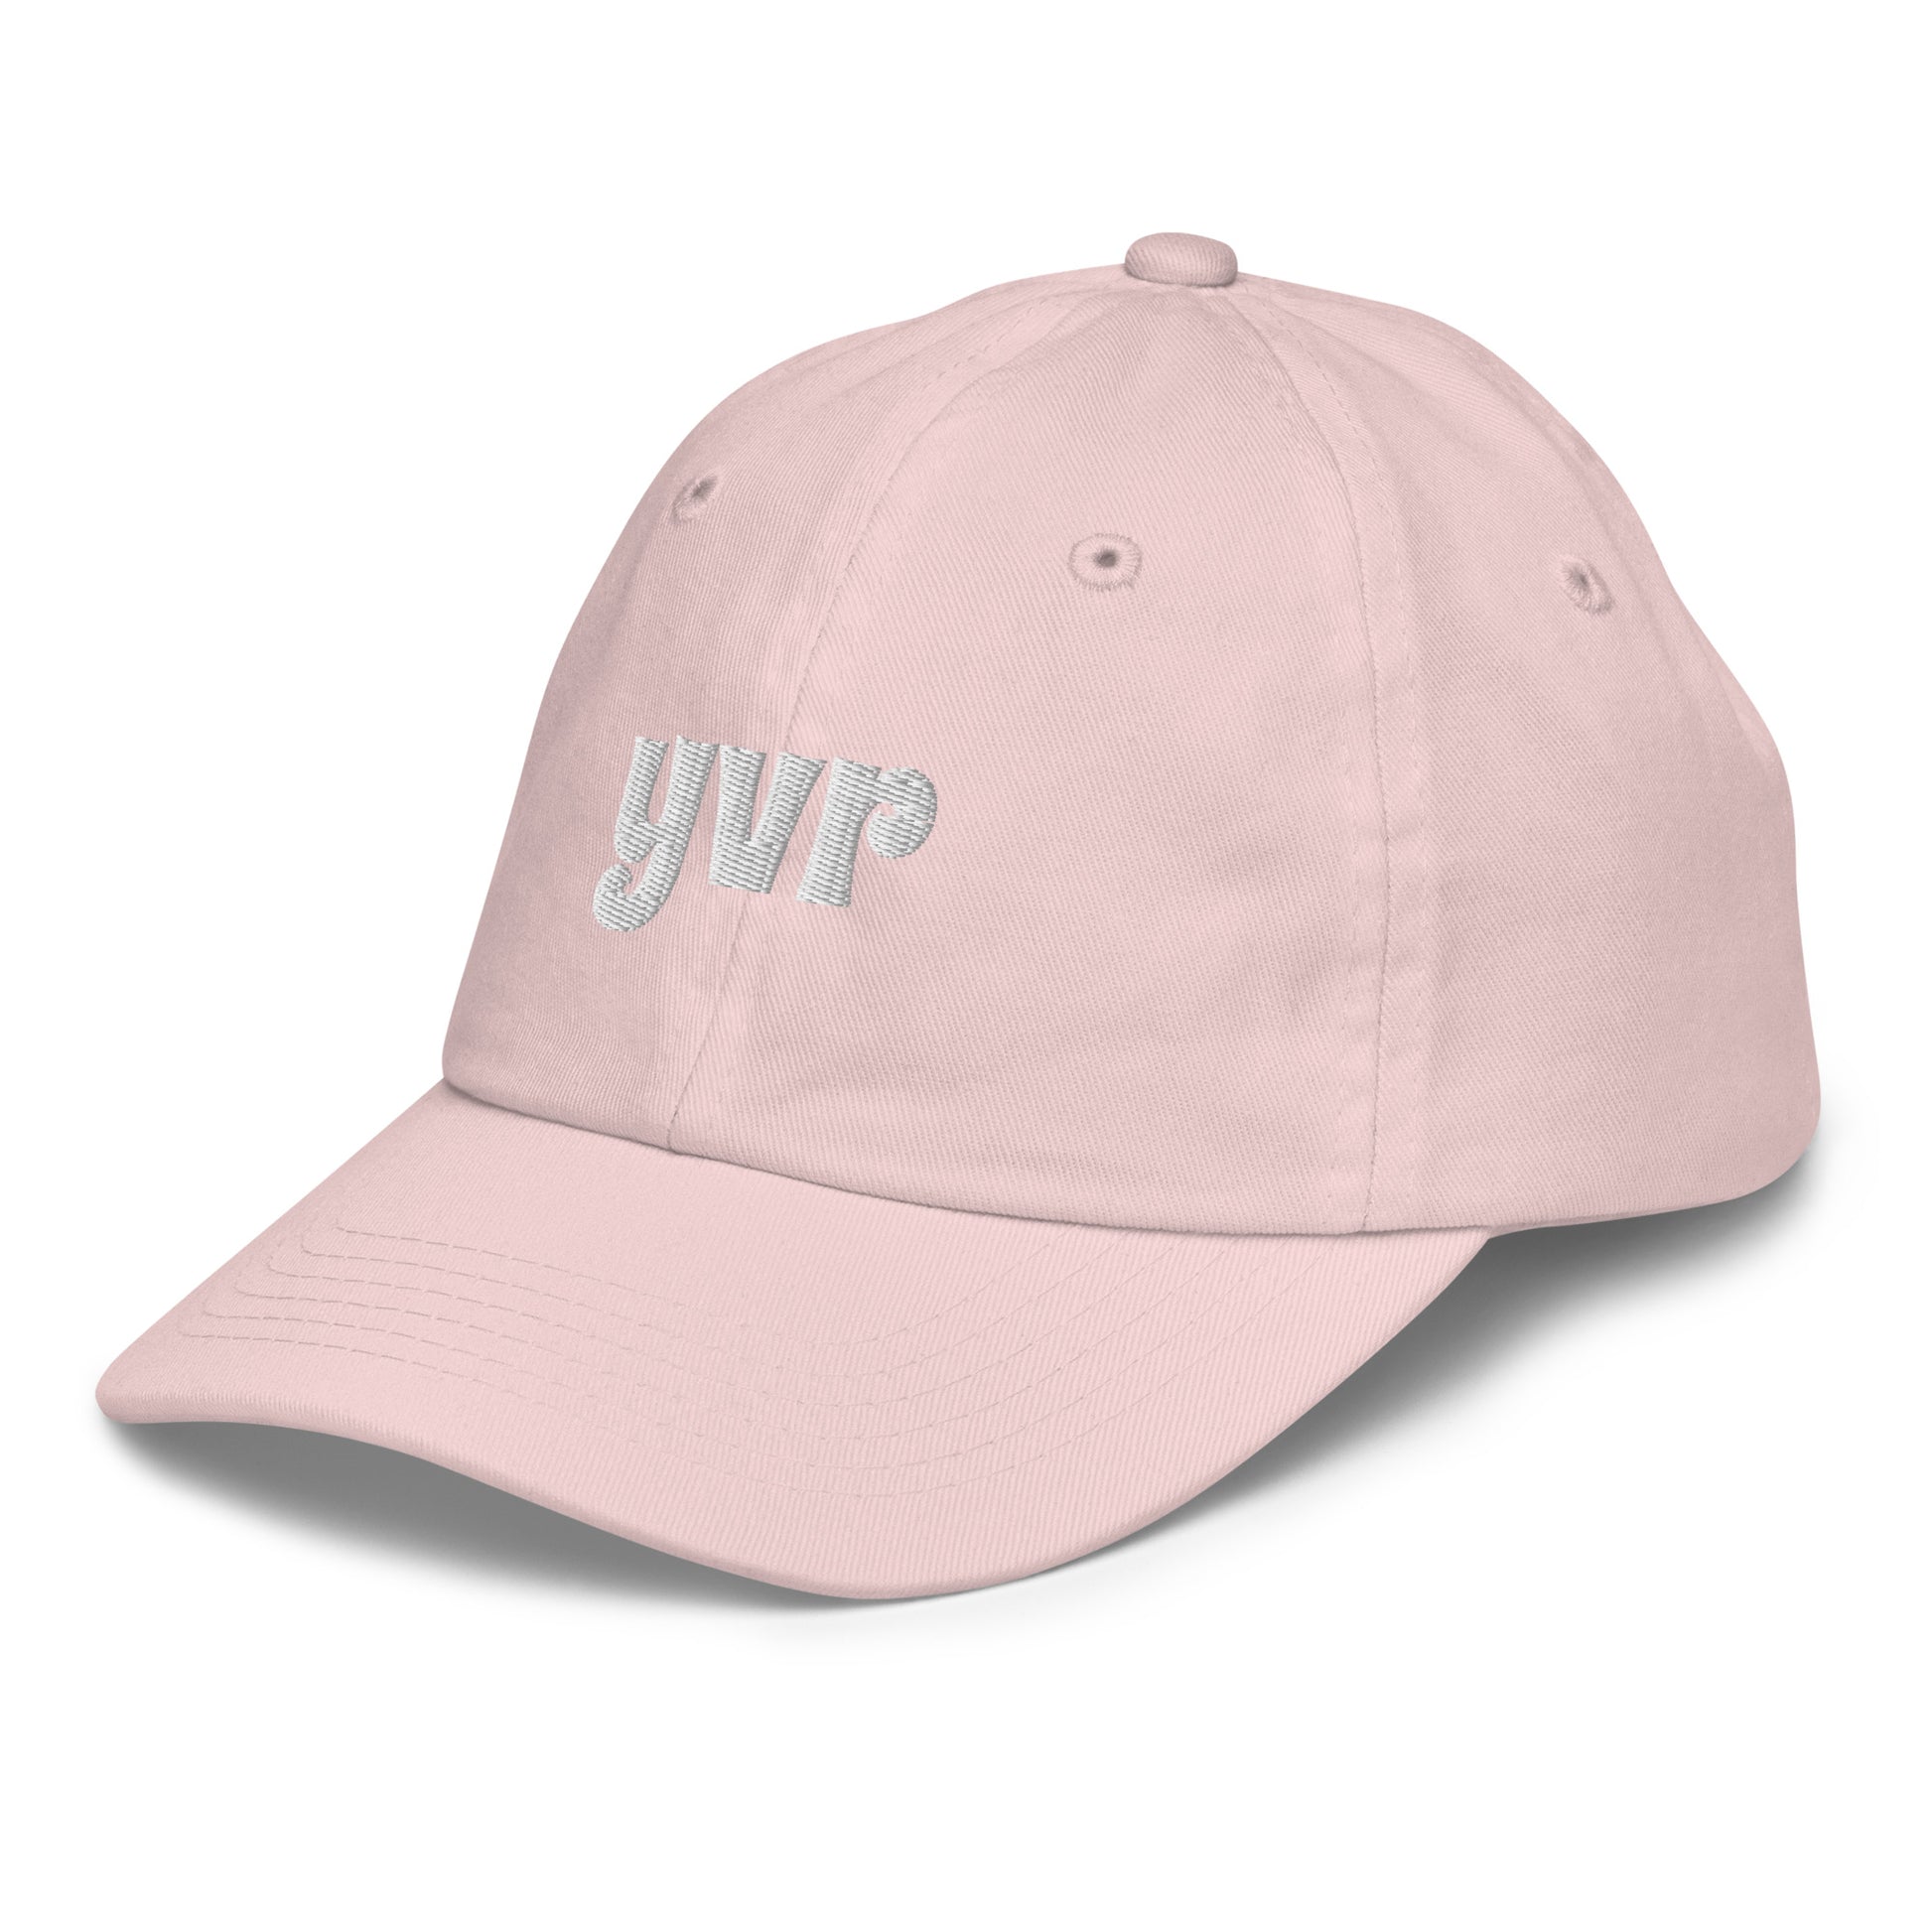 Groovy Kid's Baseball Cap - White • YVR Vancouver • YHM Designs - Image 24